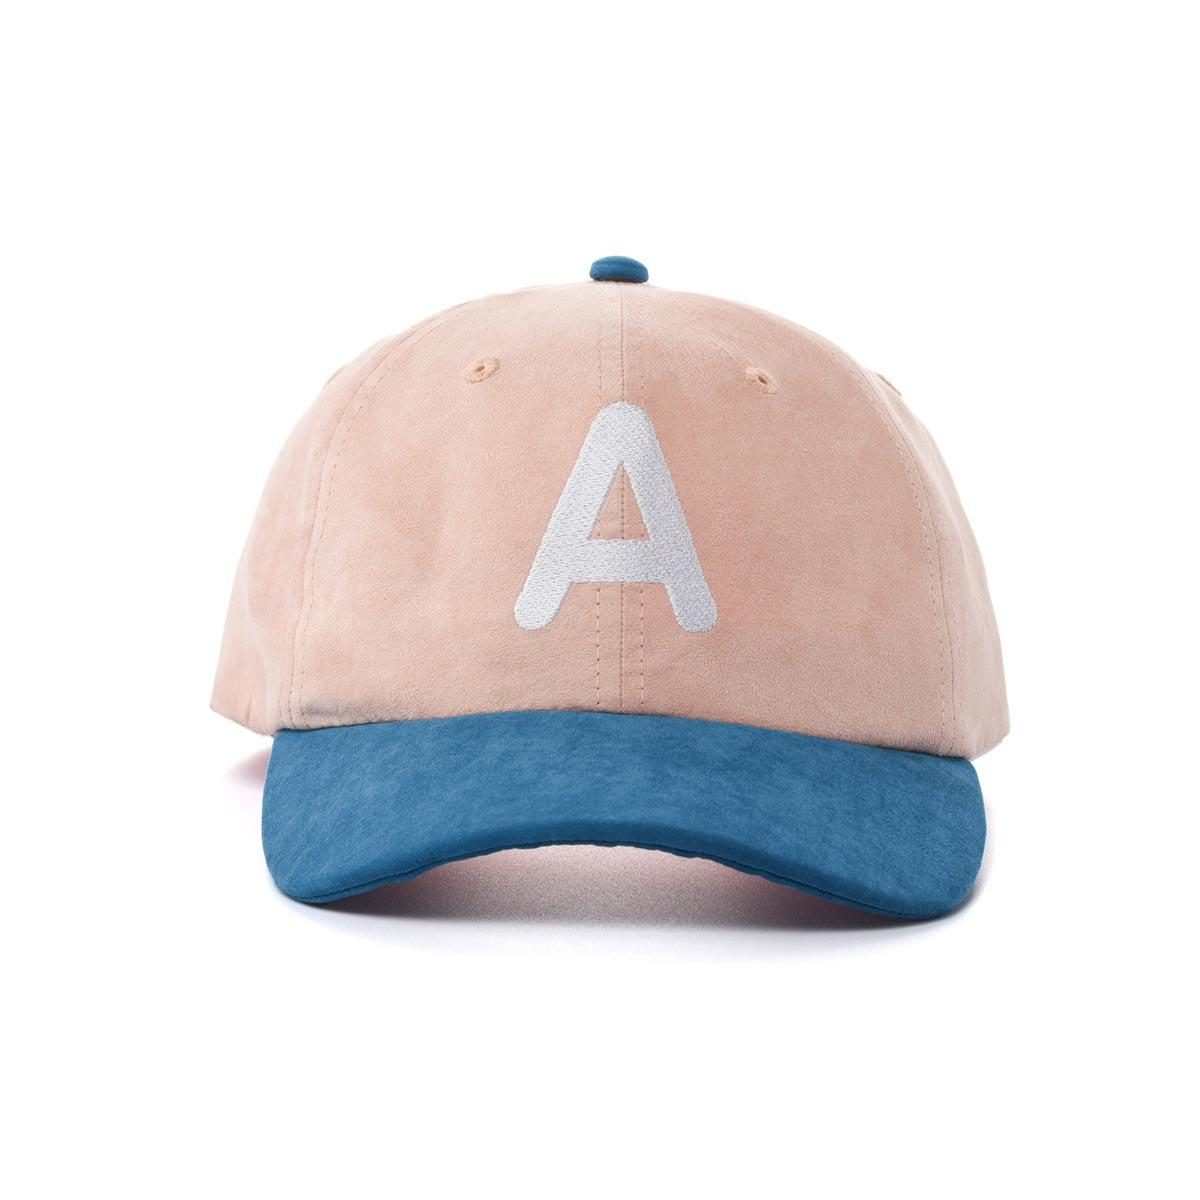 letter-A-pink-and-dark-blue-unconstructed-baseball-cap-SFA-210407-3